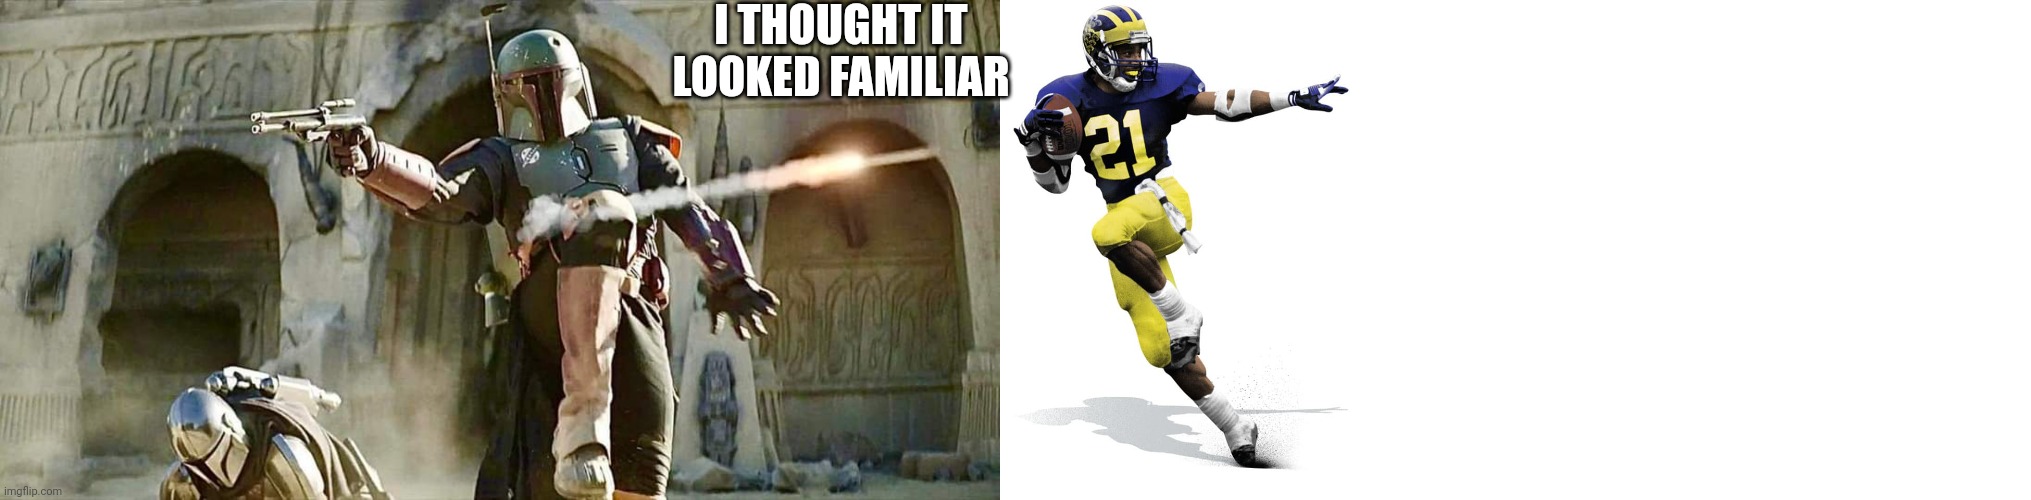 I THOUGHT IT LOOKED FAMILIAR | image tagged in razzle dazzle fett,wolverine heisman,blank white template | made w/ Imgflip meme maker